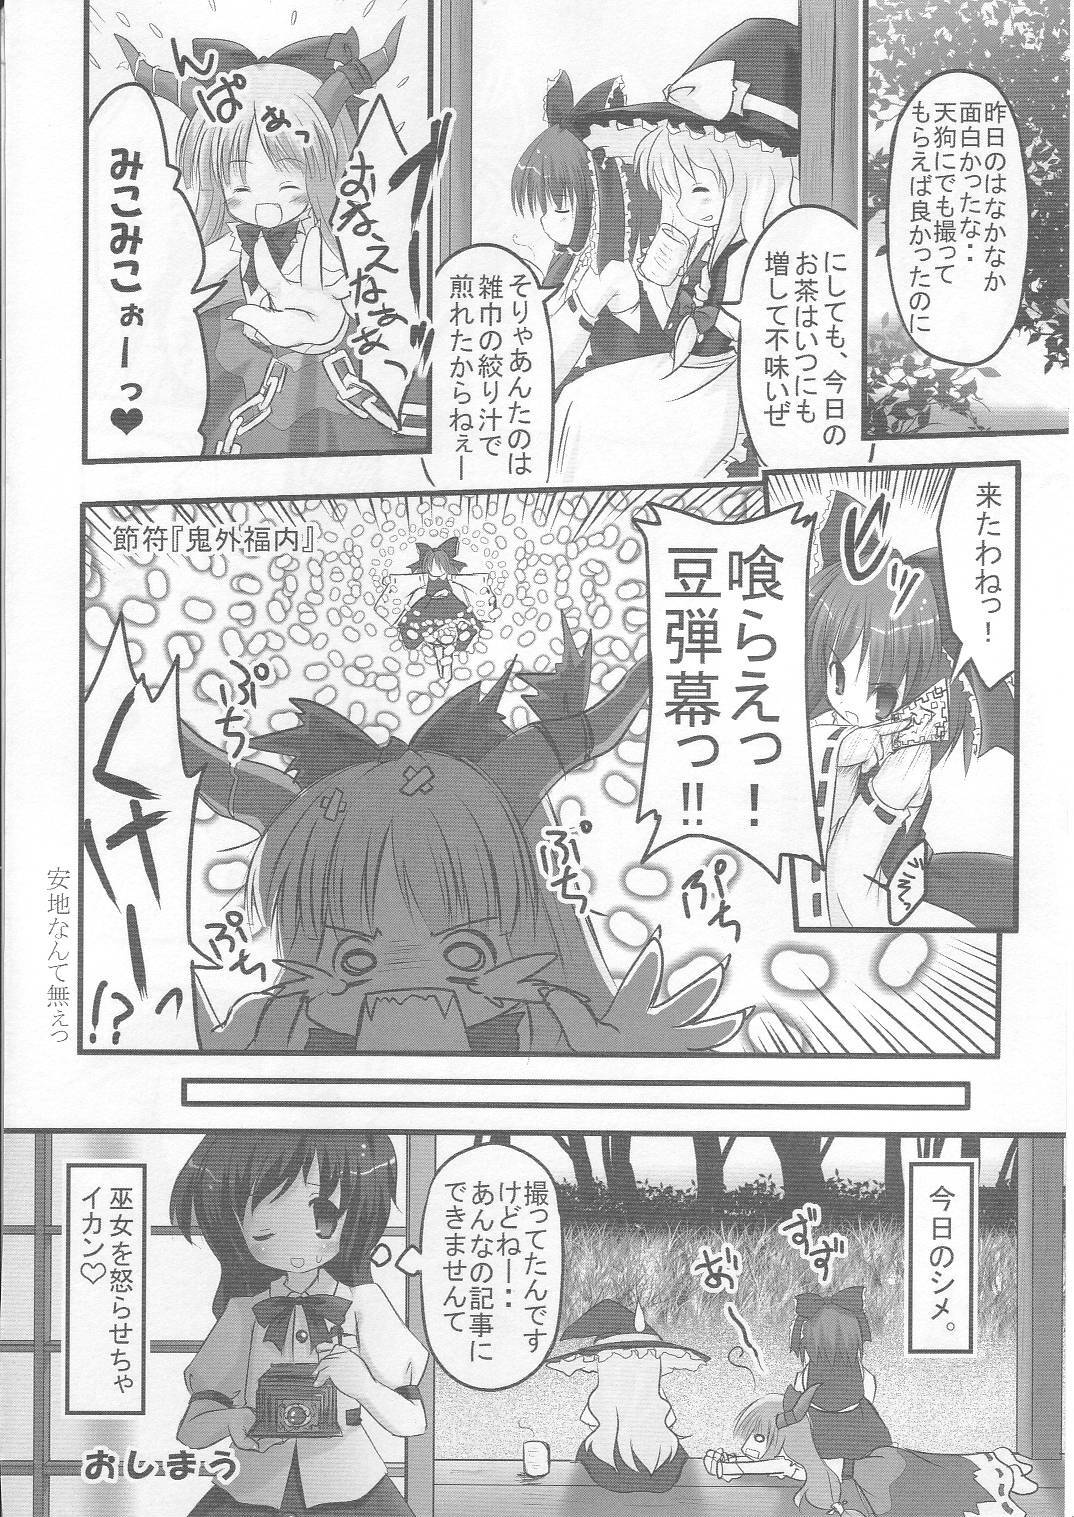 (SC30) [HappyBirthday (Maruchan., Monchy)] REDEMPTION (Touhou Project) page 27 full